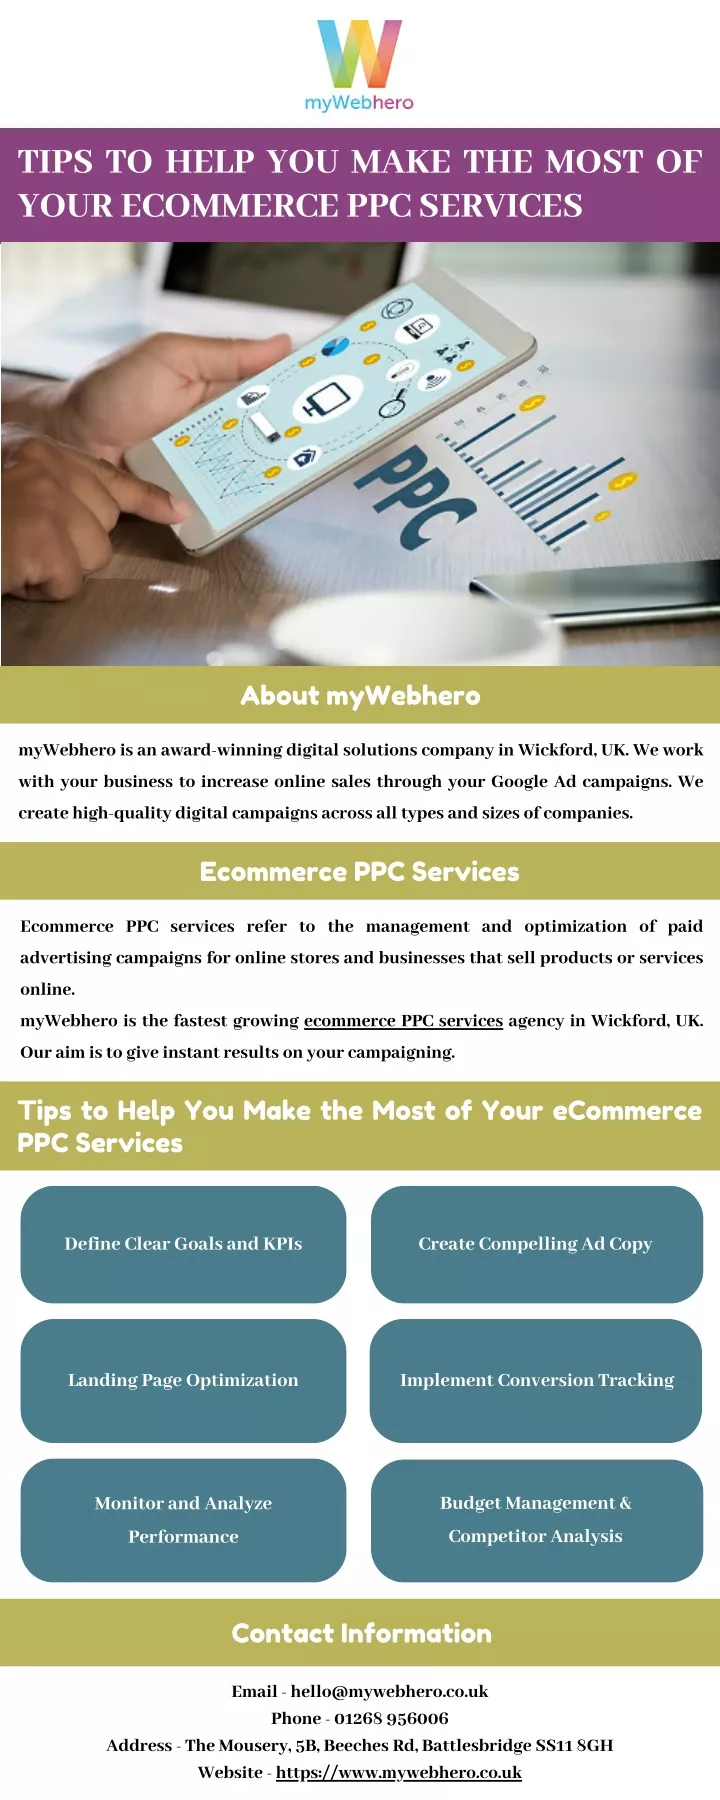 tips to help you make the most of your ecommerce